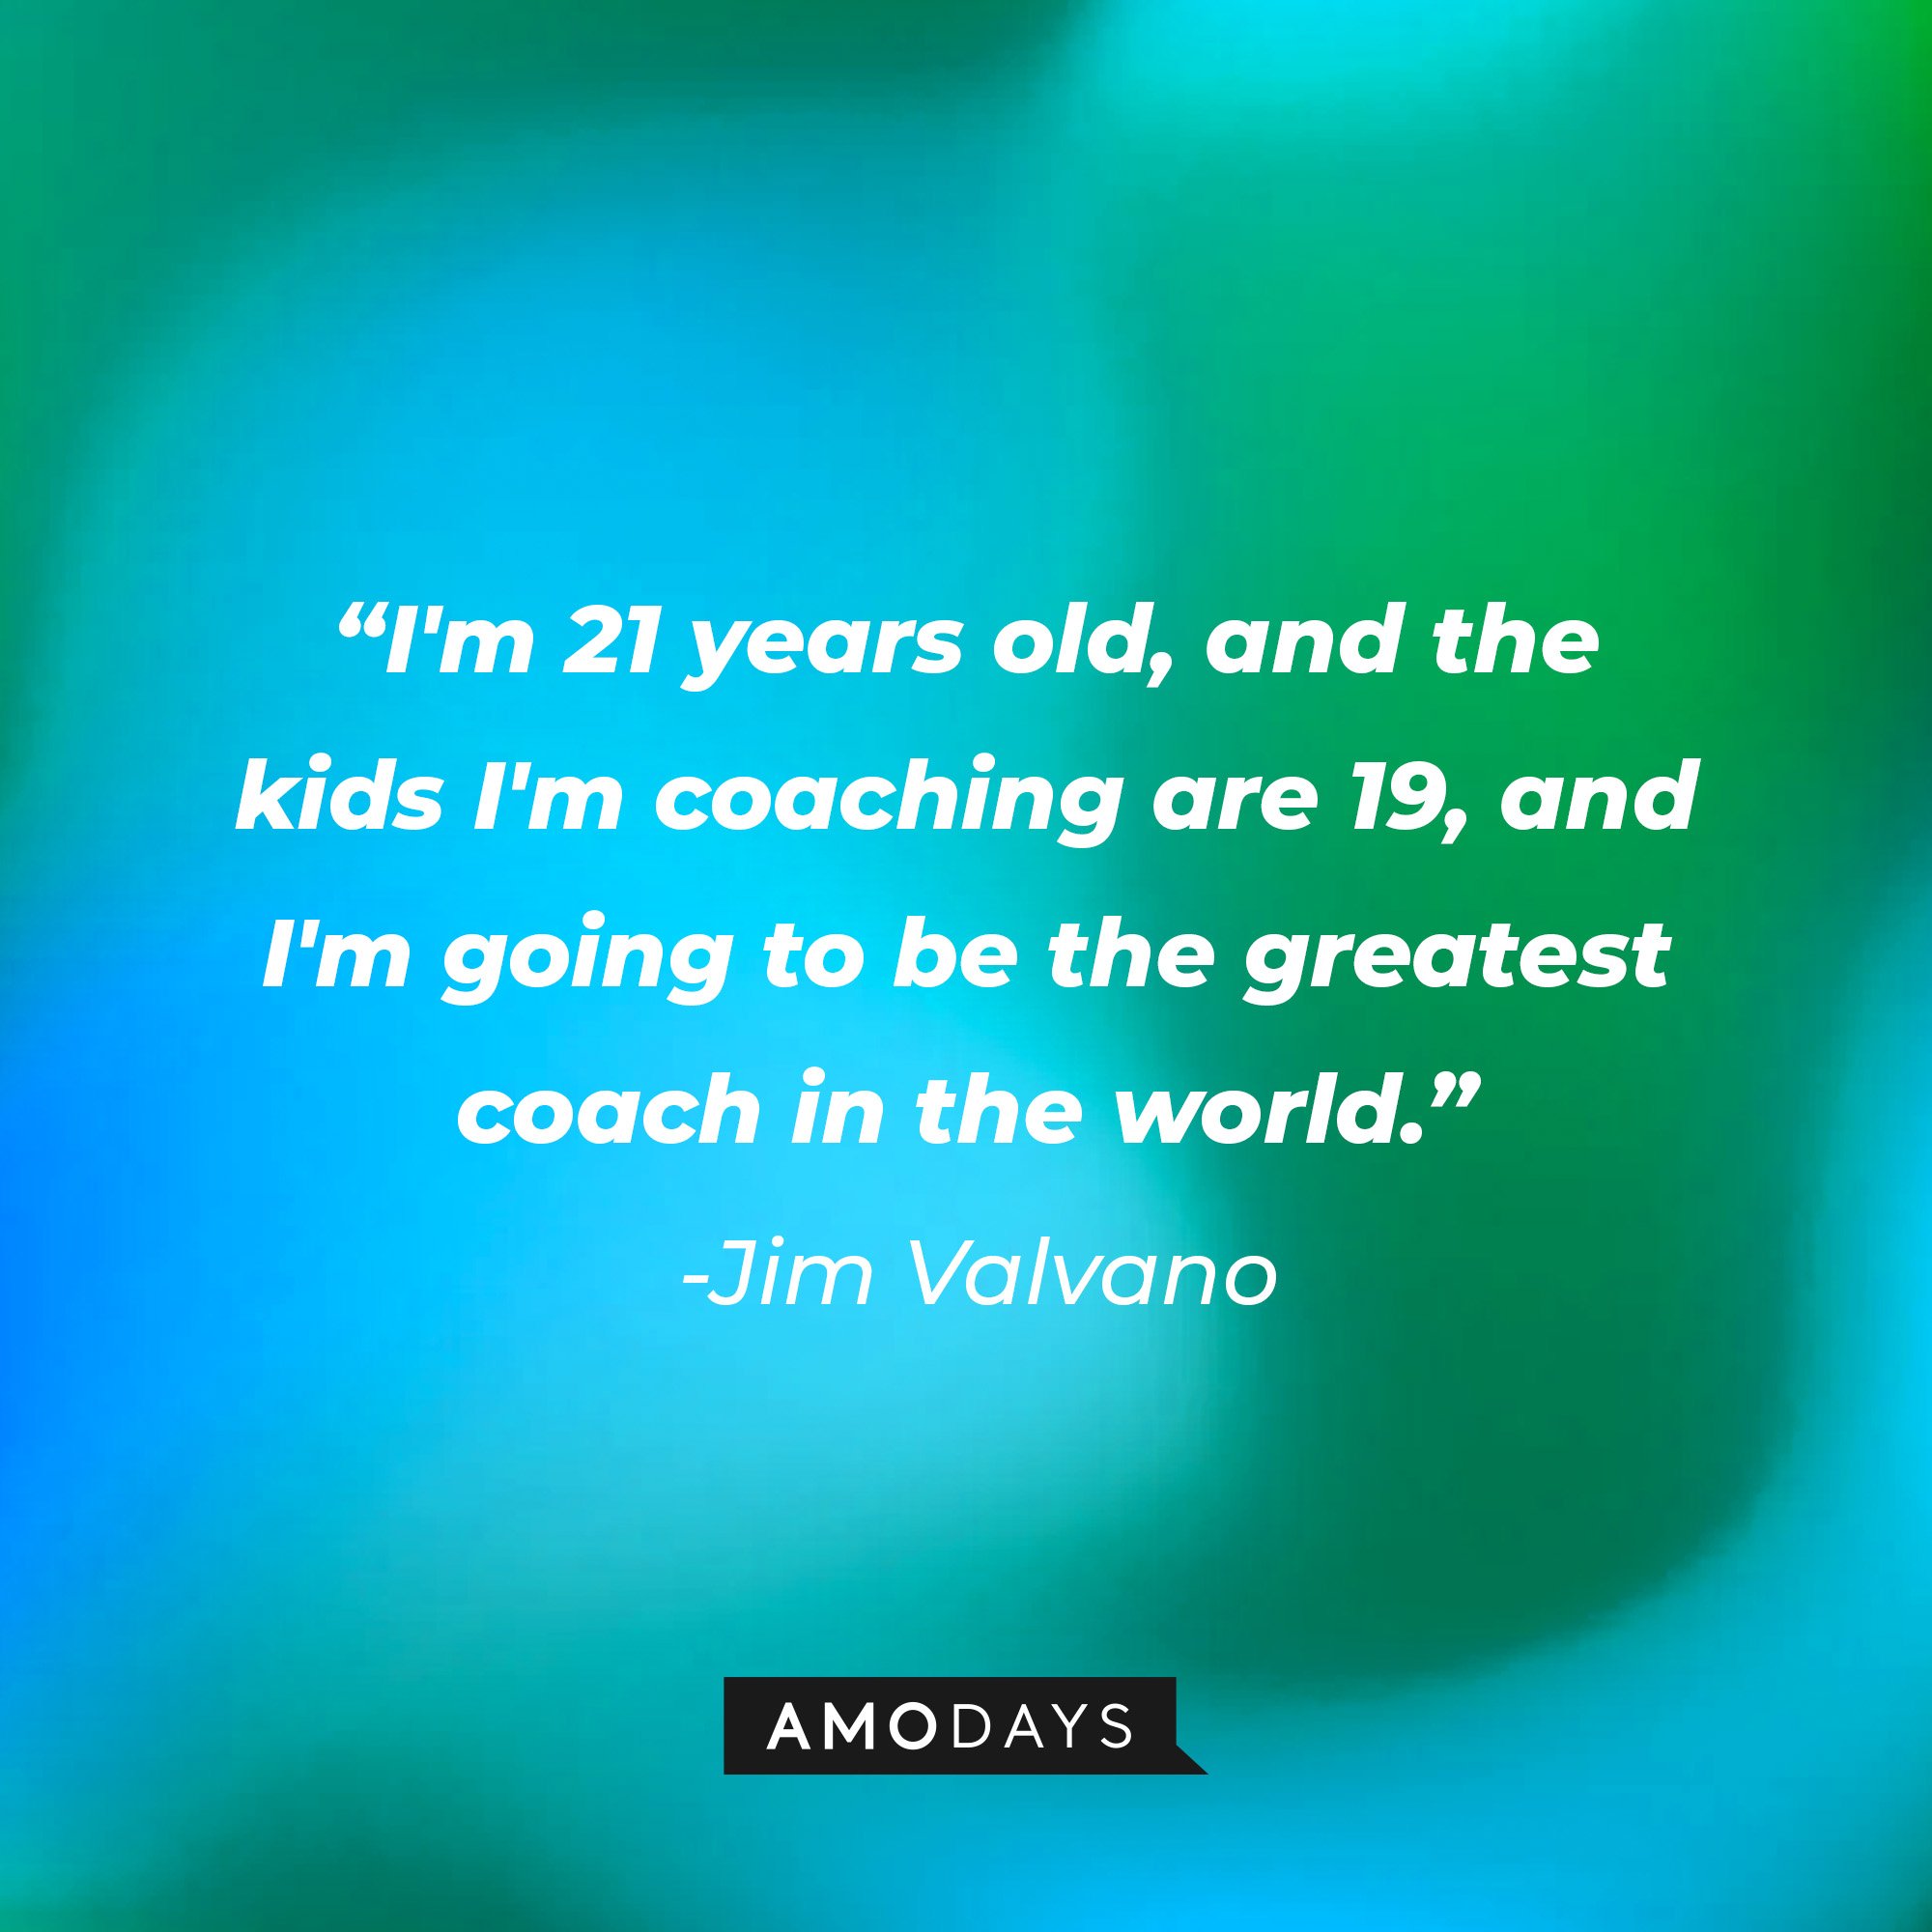  Jim Valvano’s quote: "I'm 21 years old, and the kids I'm coaching are 19, and I'm going to be the greatest coach in the world." | Image: AmoDays